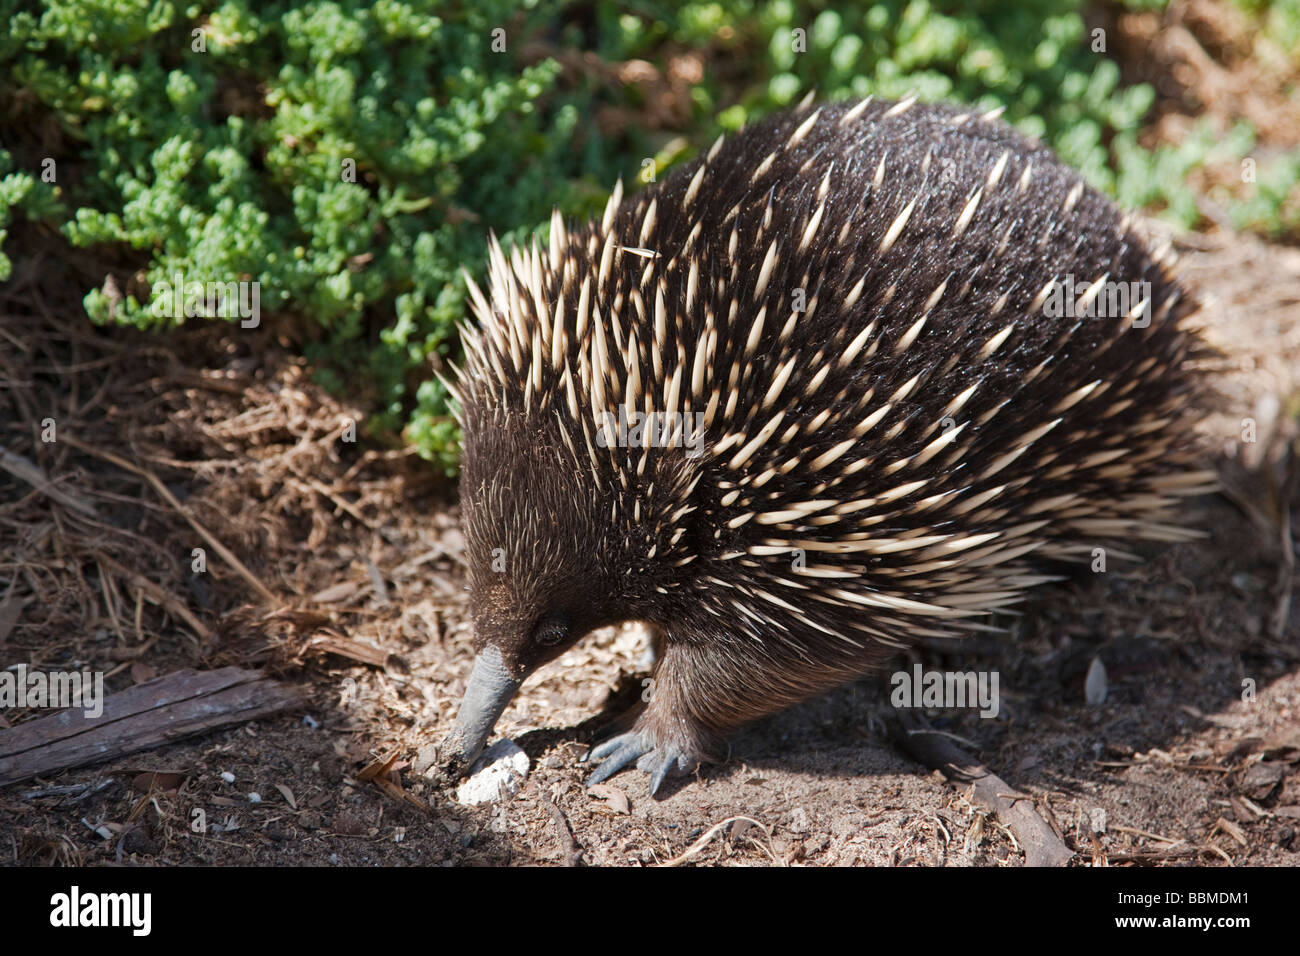 Australia, Victoria.  A short-nosed echidna or spiny anteater. Stock Photo